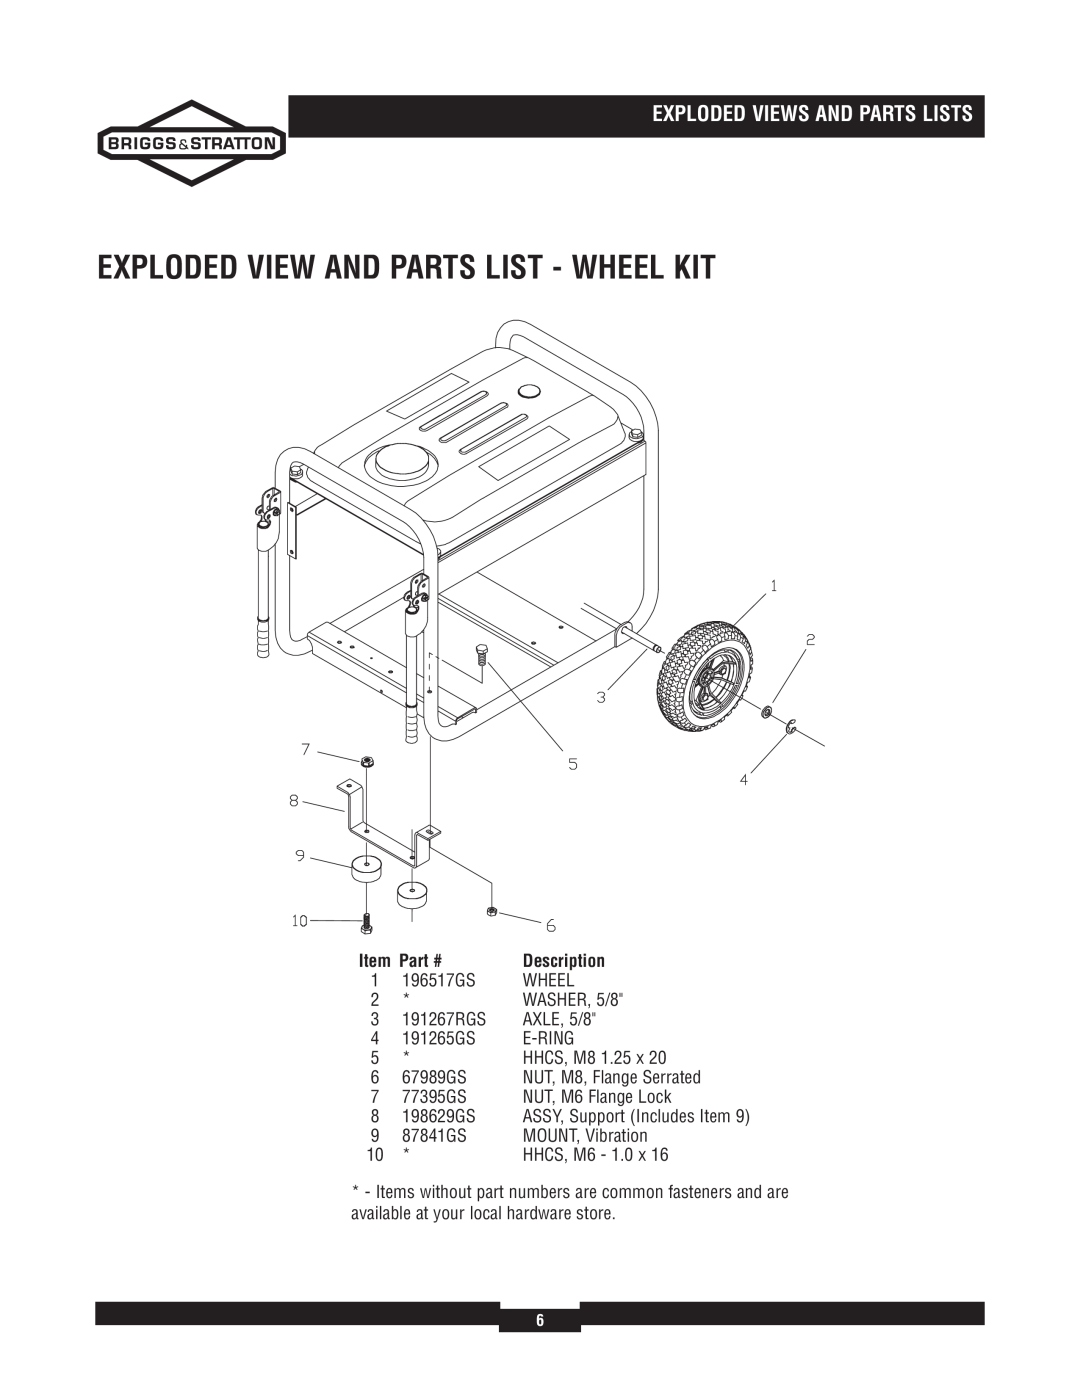 Briggs & Stratton 030244-02 manual Exploded View And Parts List - Wheel Kit, Exploded Views And Parts Lists, Item Part # 